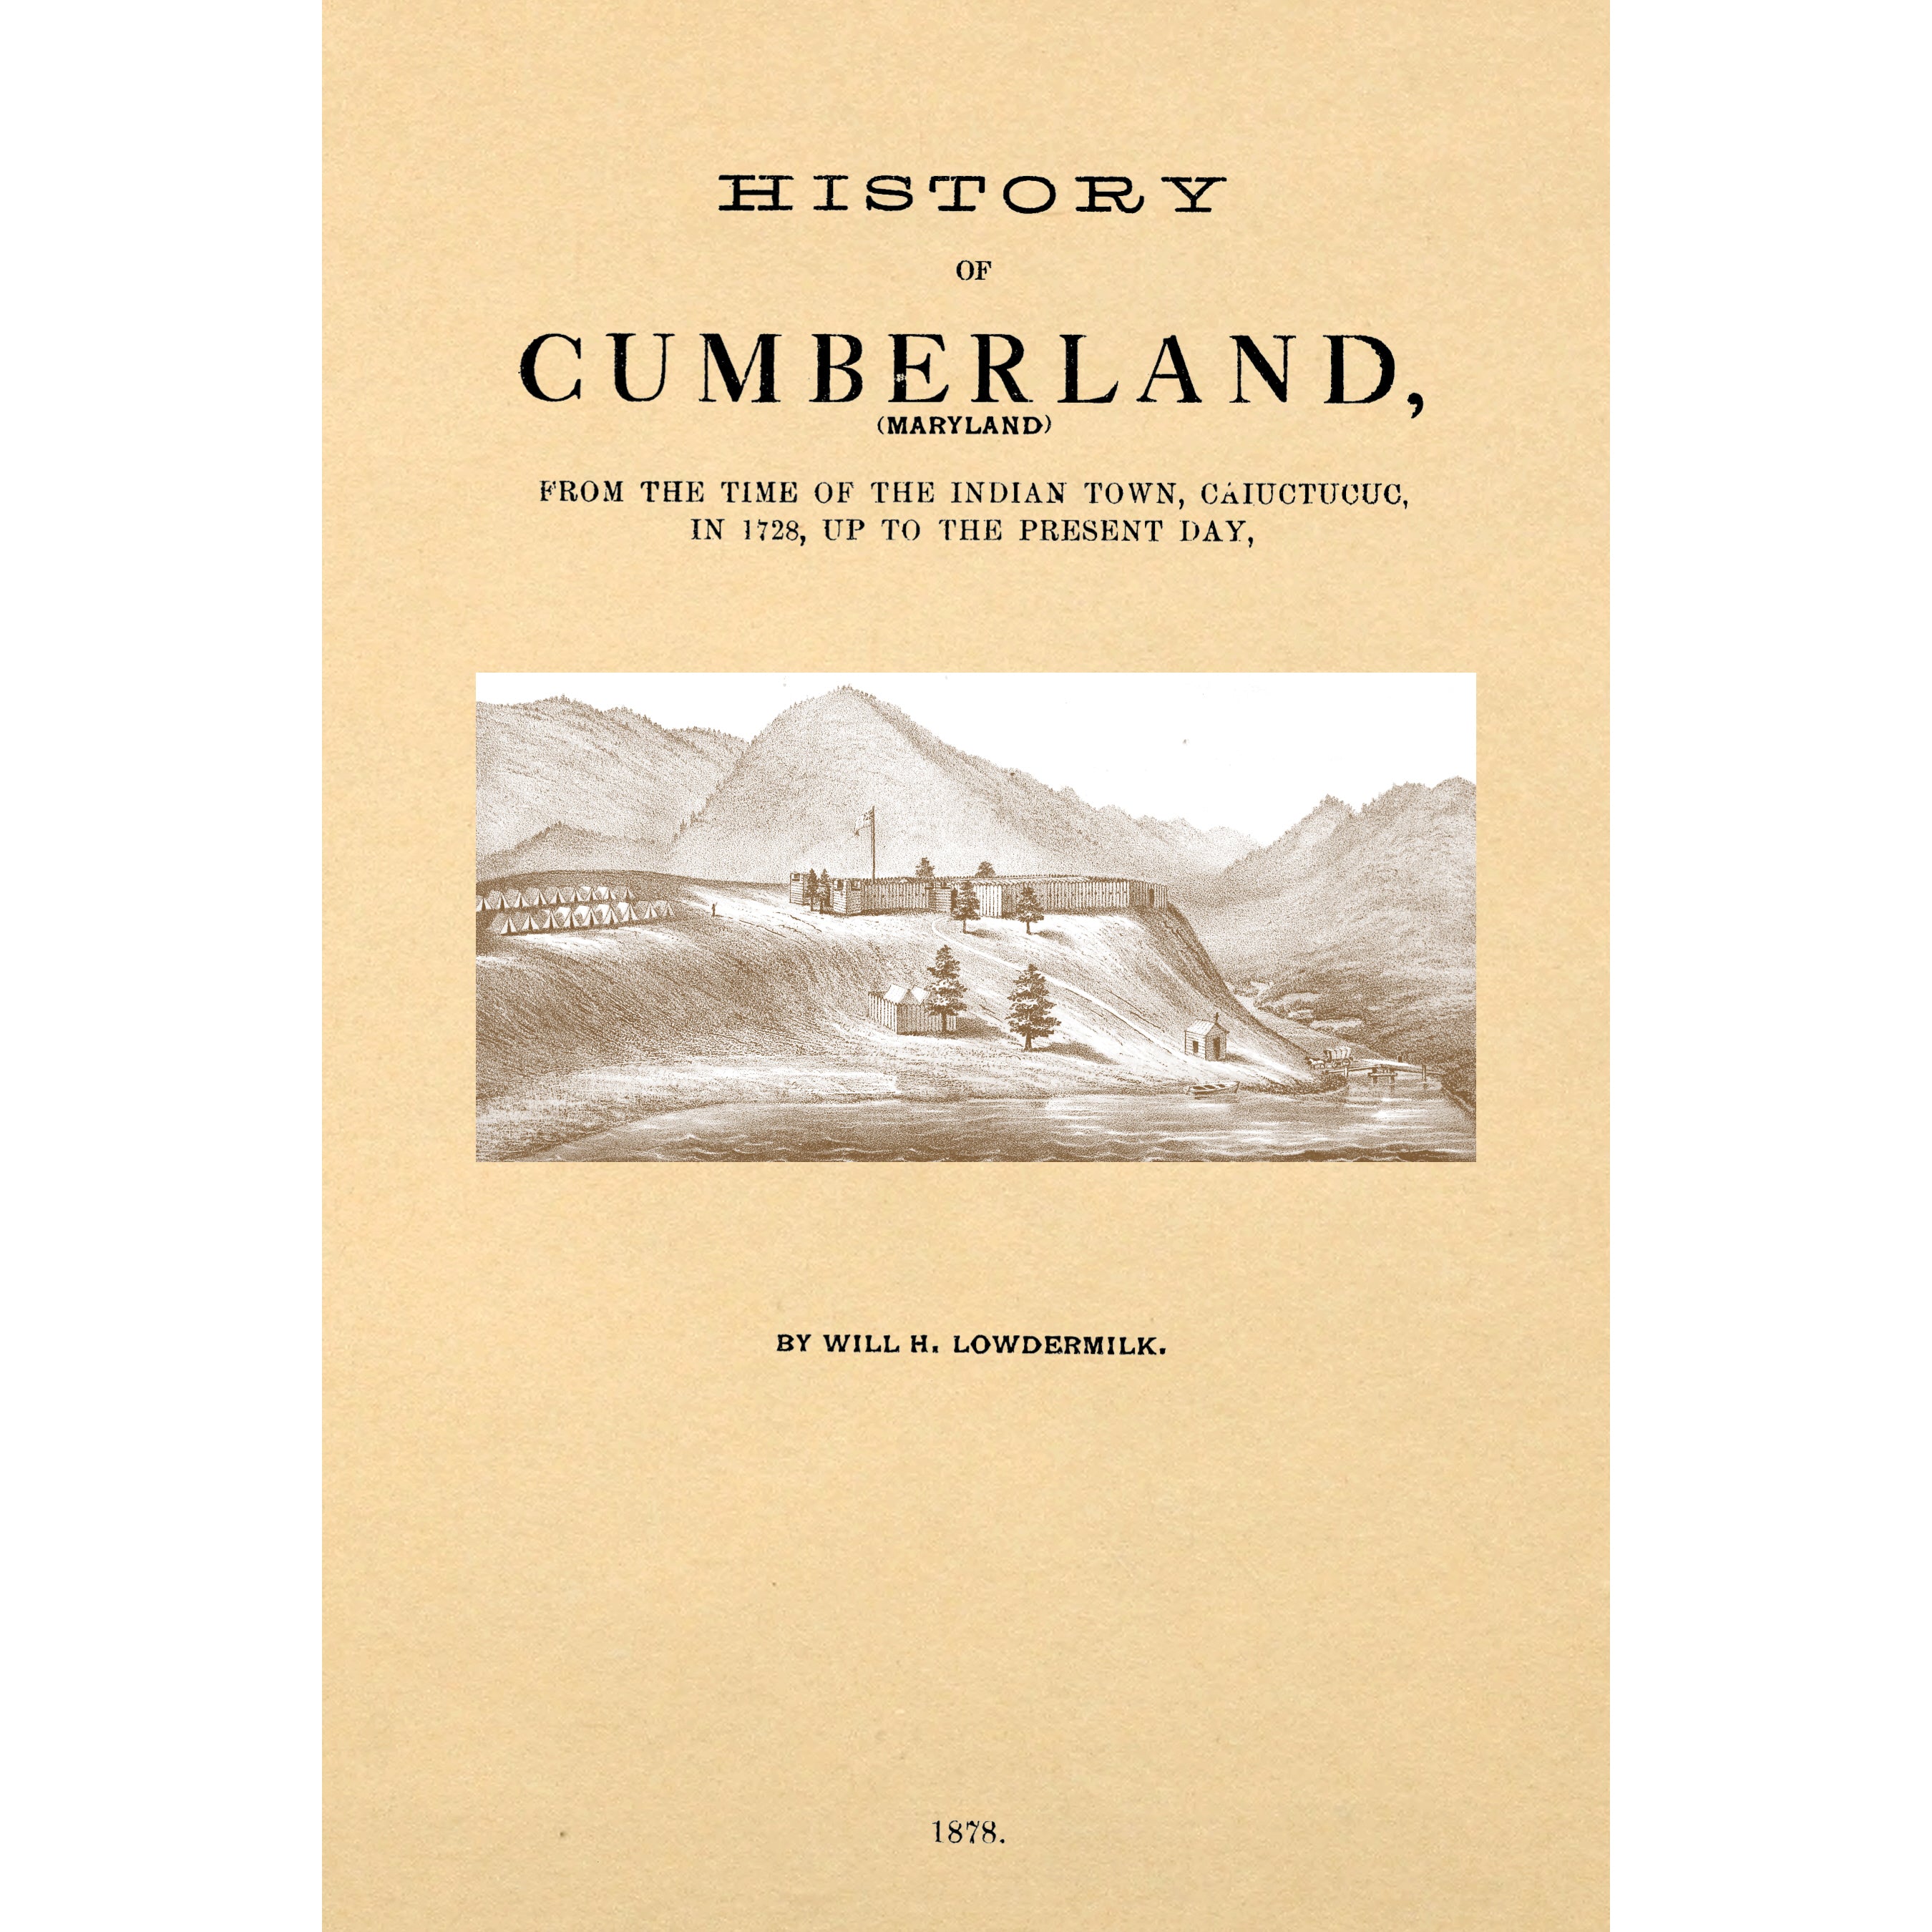 History of Cumberland, (Maryland) from the time of the Indian town, Caiuctucuc, in 1728, up to the present day